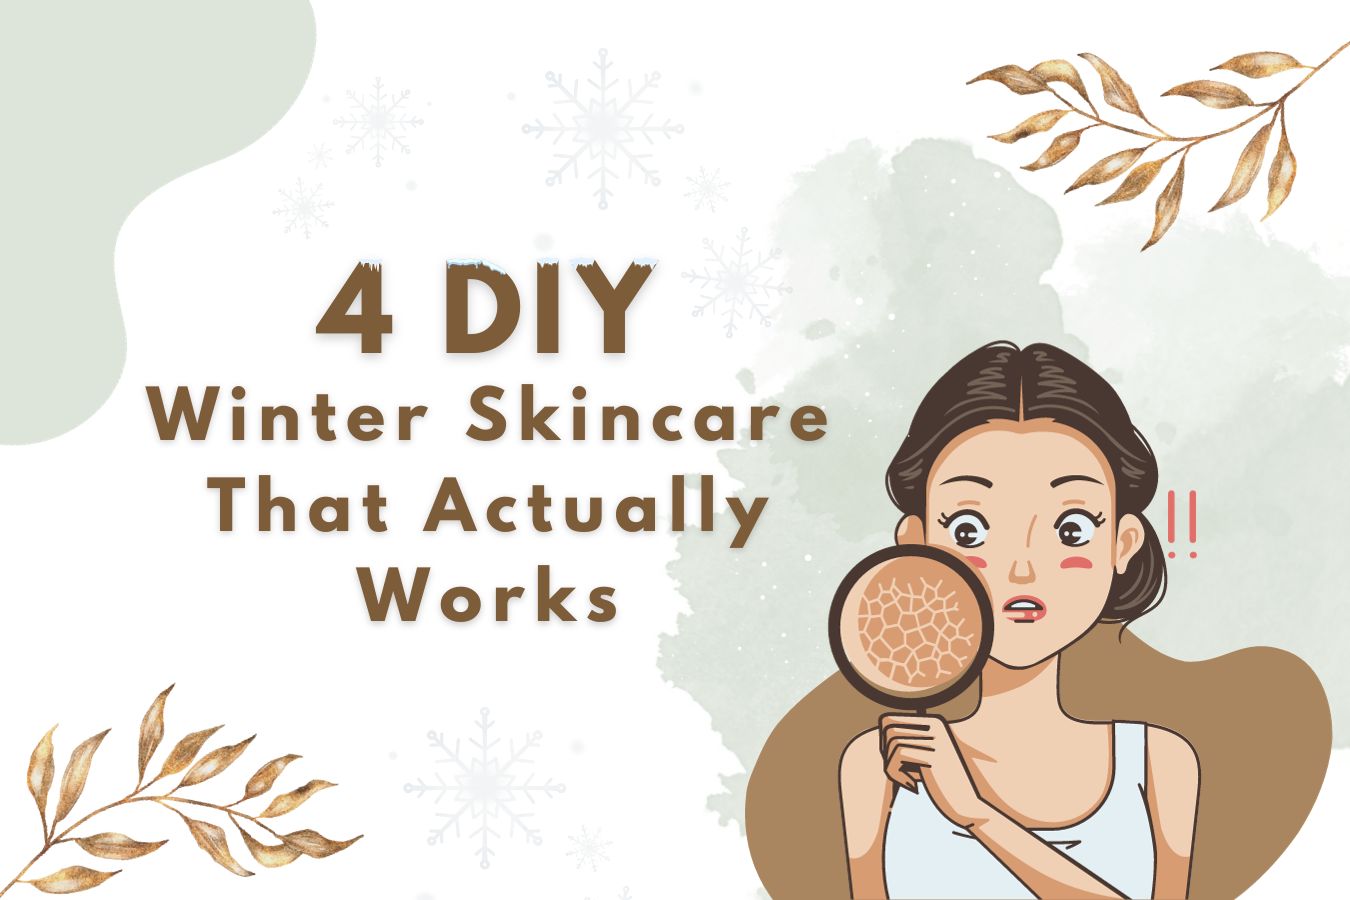 4 DIY Winter Skincare That Actually Works